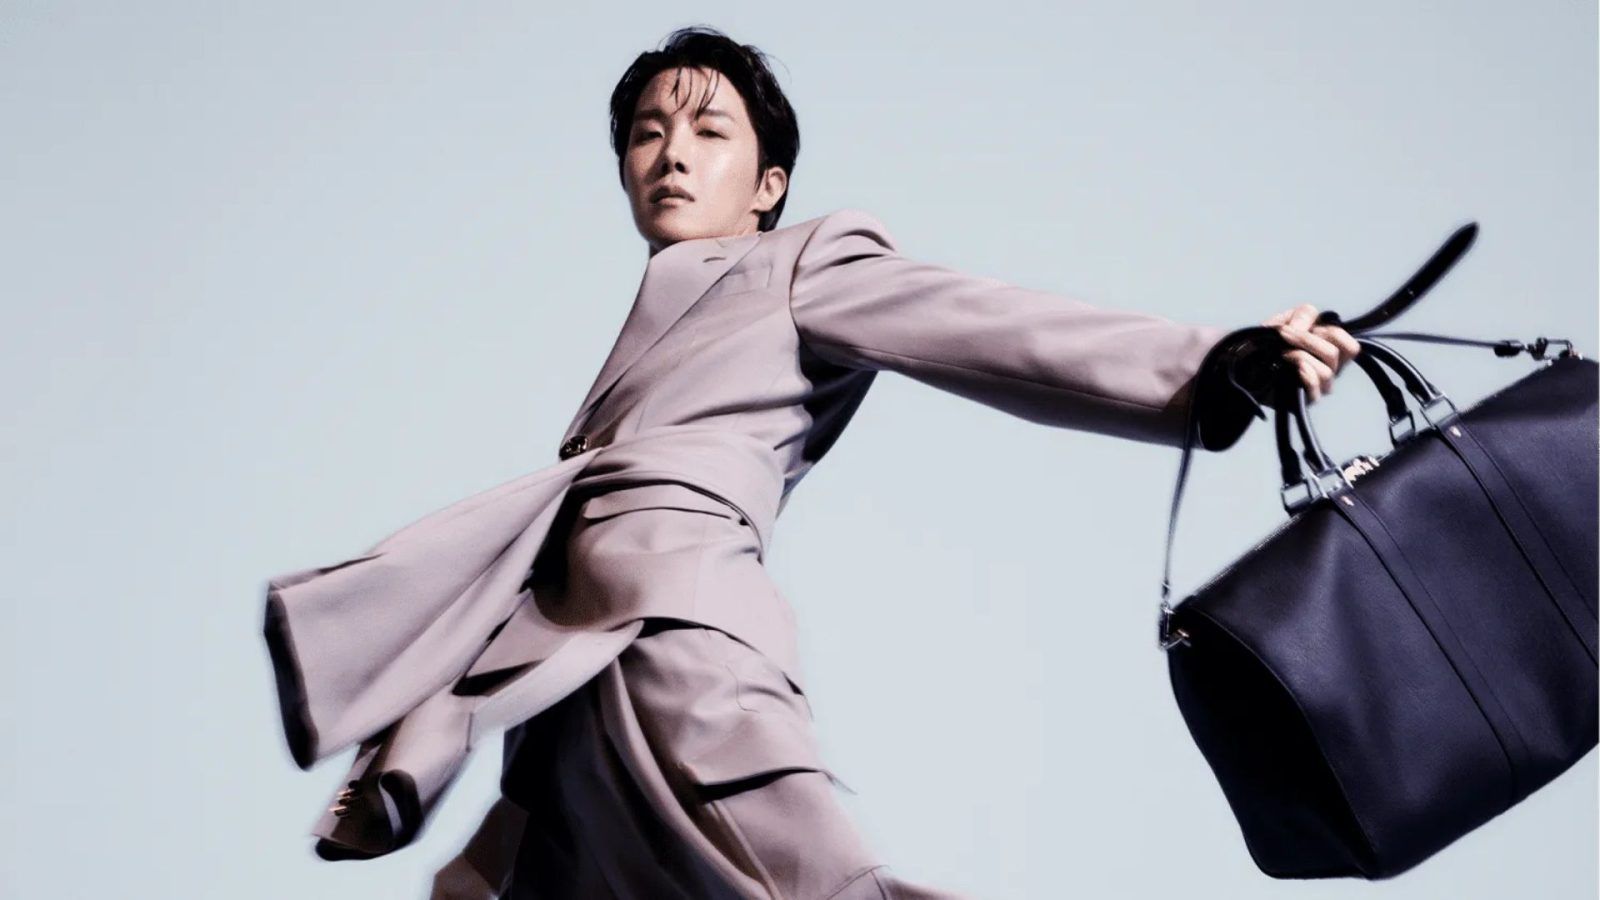 The article: Louis Vuitton unveiled its new campaign film